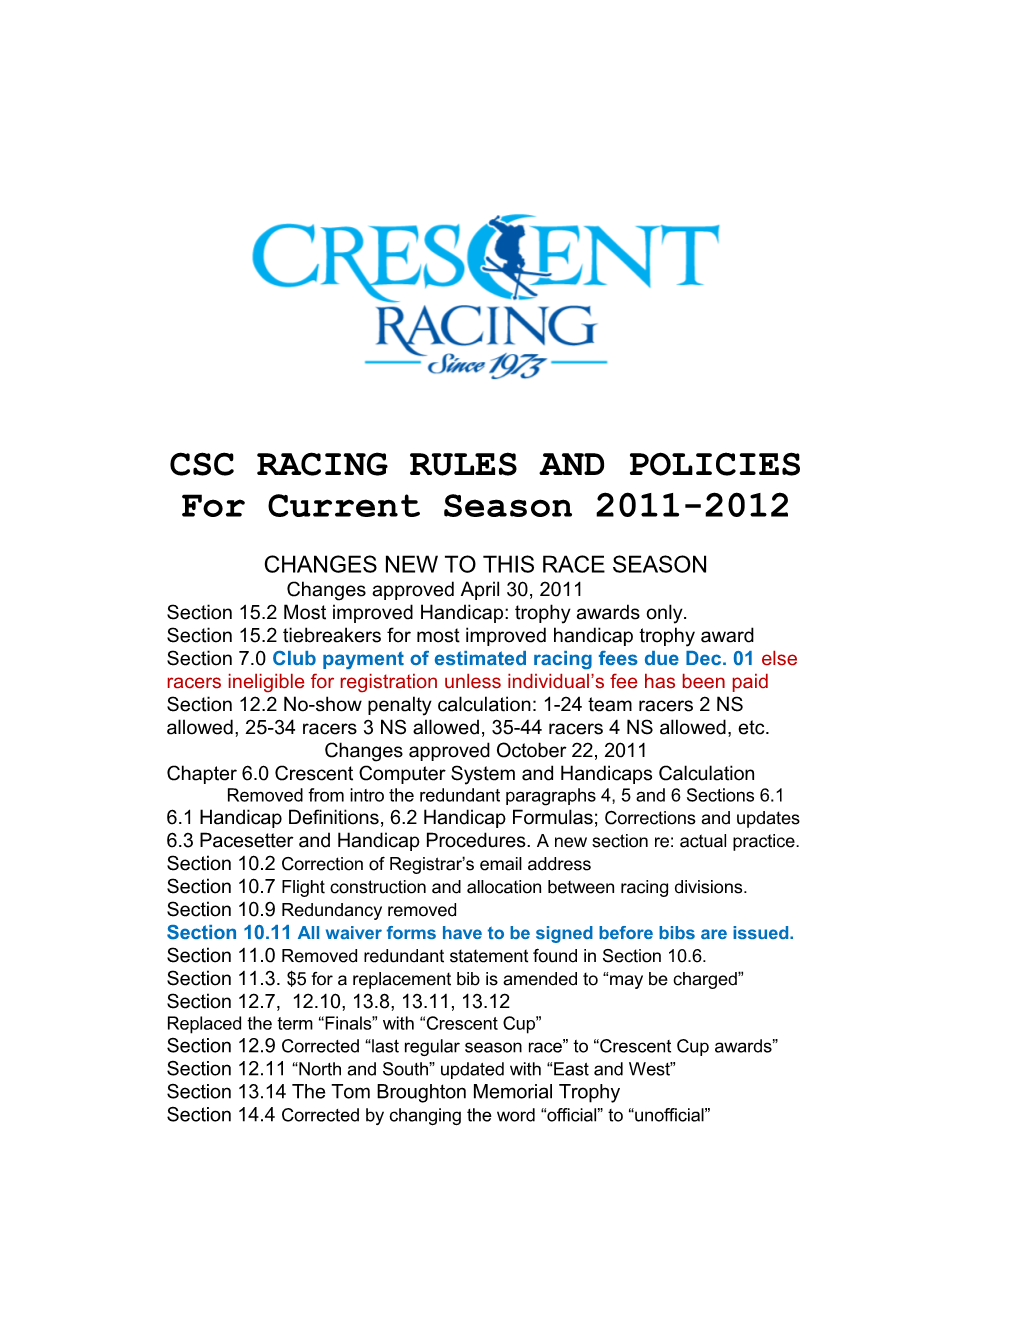 Crescent Racing Rules and Policies